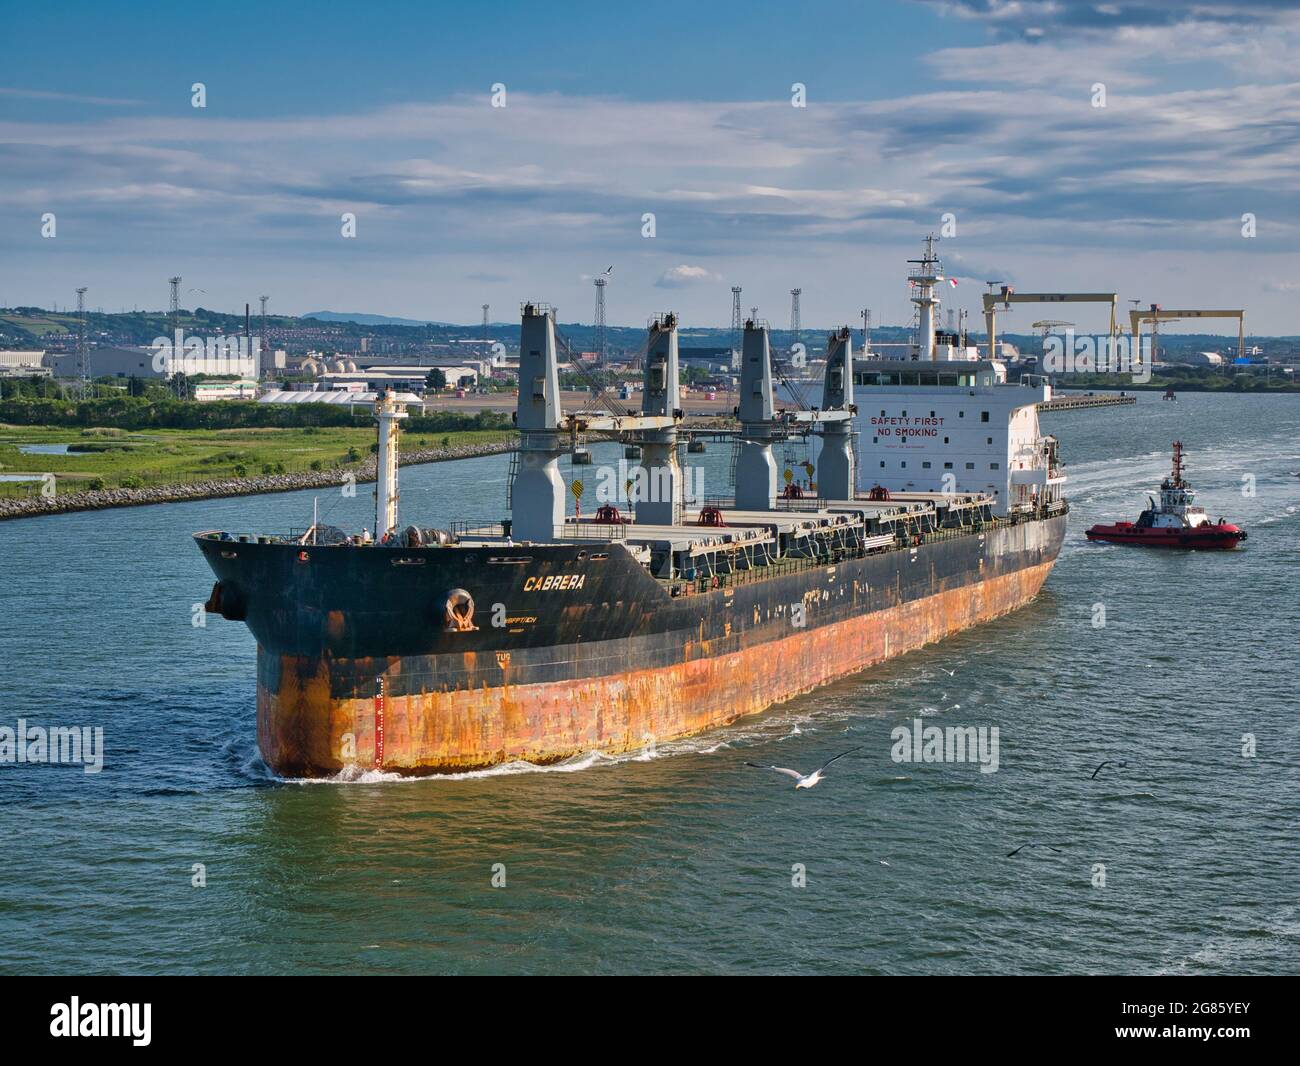 The bulk carrier Cabrera leaving Belfast Harbour in June 2021 on a clear, sunny evening in June 2021. The ship is escorted by the Masterman tug boat. Stock Photo